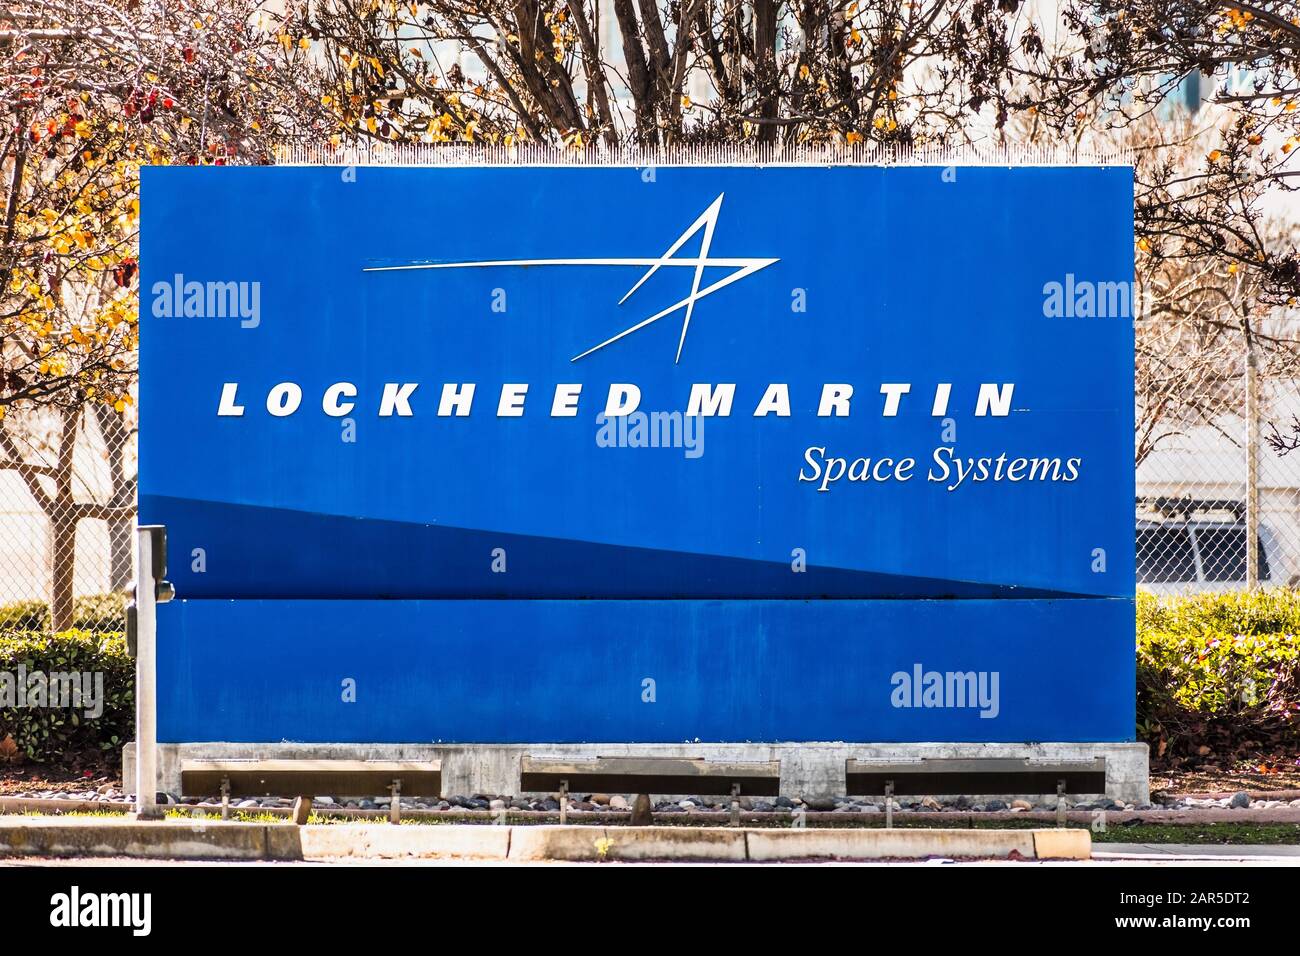 Jan 24, 2020 Sunnyvale / CA / USA - Lockheed Martin sign at the facilities located in Silicon Valley; Lockheed Martin Space Systems is one of the four Stock Photo